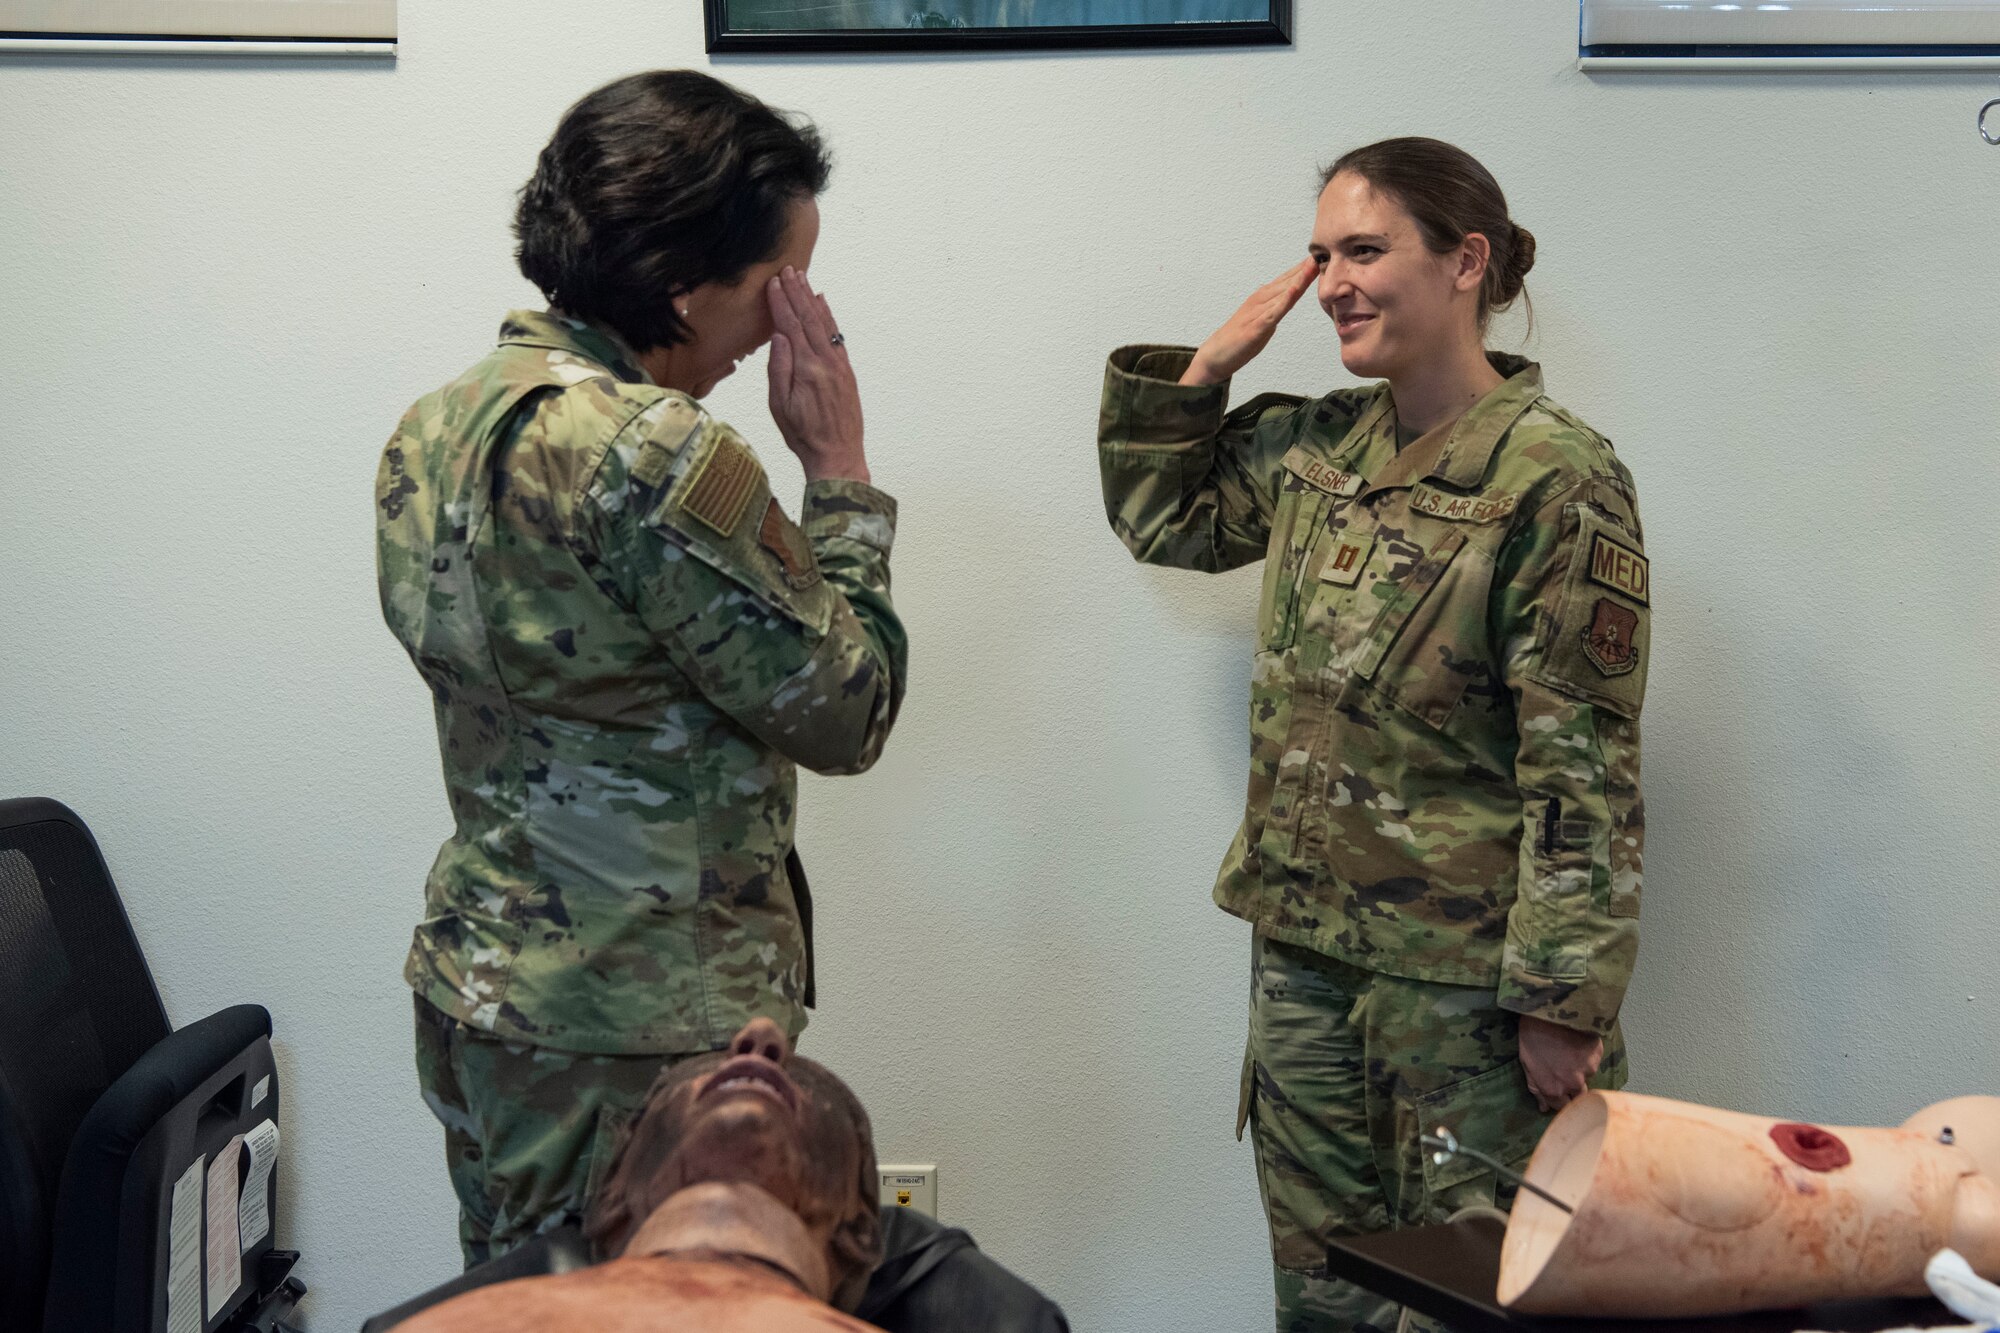 Capt. Allison Elsner, 7th Medical Group education and training clinical nurse, salutes Brig. Gen. Jeannine Ryder, 59th Medical Wing commander and chief of the Air Force Nurse Corps, at Dyess Air Force Base, Texas, February 22, 2023. Ryder and Chief Master Sgt. Taliah Wilkerson, Air Force Readiness Agency's Aerospace Medical Service and Surgical Service Career Field Manager, provided a strategic overview and future posture of the Total Nursing Force at the 7th MDG, while also learning about the different mission sets by the Airmen. (U.S. Air Force photo by Airman 1st Class Alondra Cristobal Hernandez)